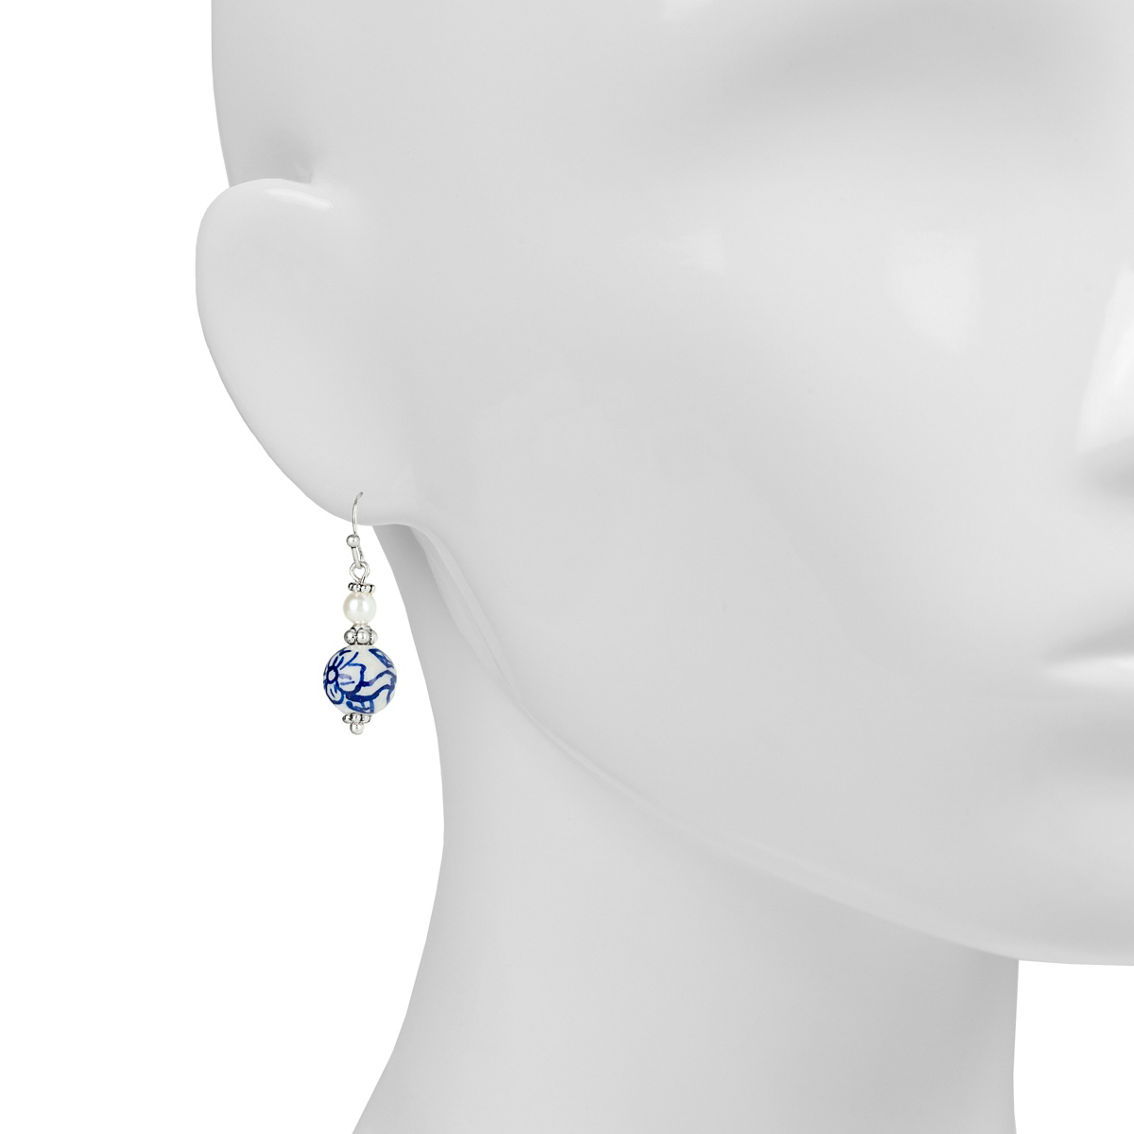 Patricia Nash Blue Double Drop Earrings - Image 2 of 2